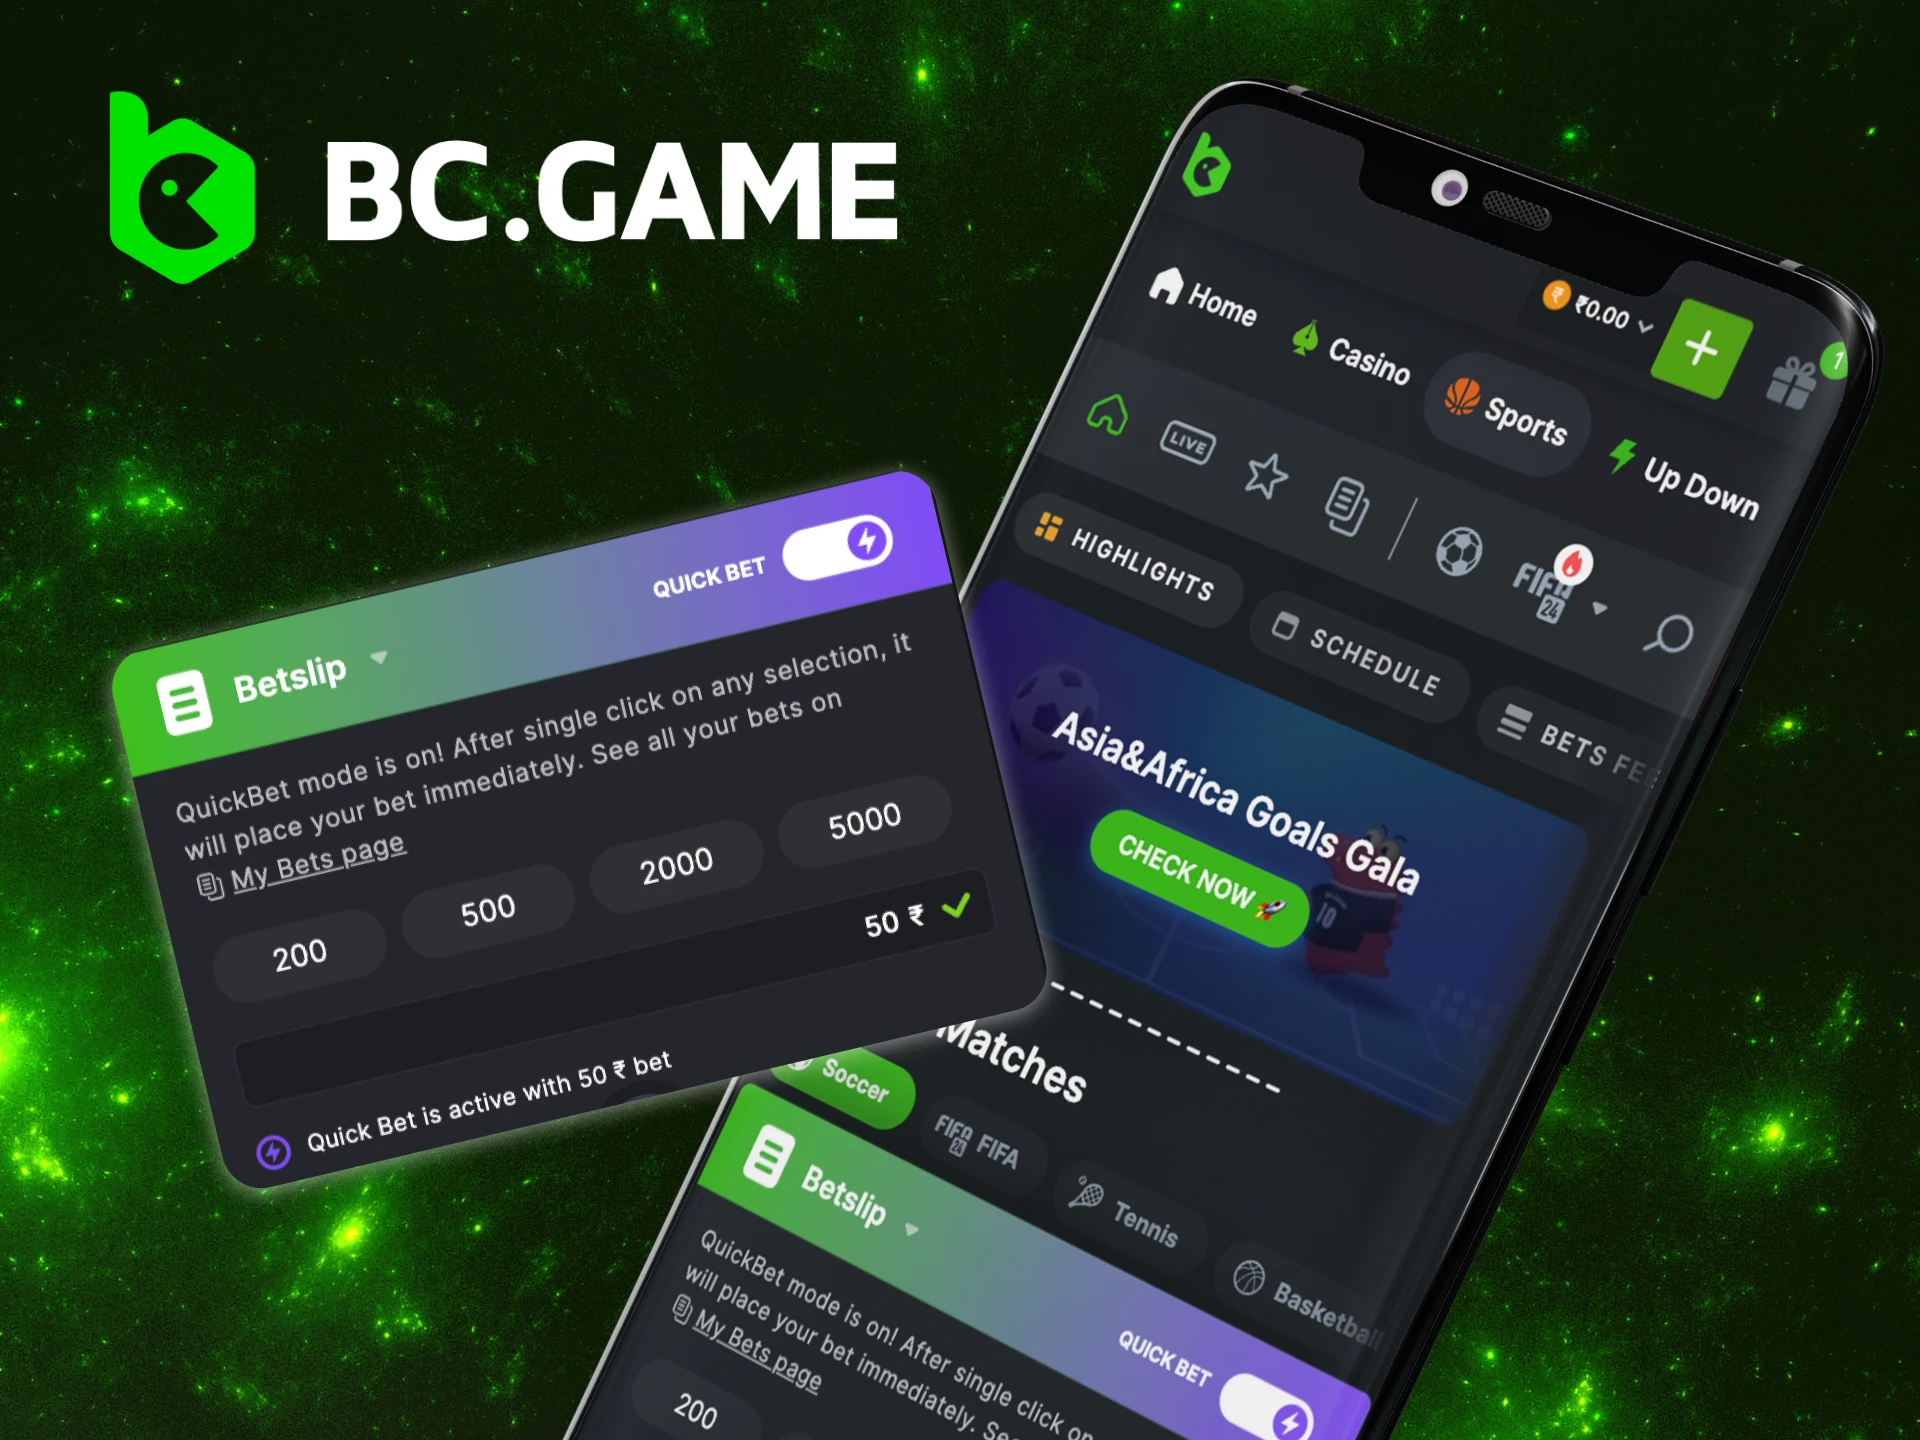 Instructions on how a user can place bets in the BC Game application.